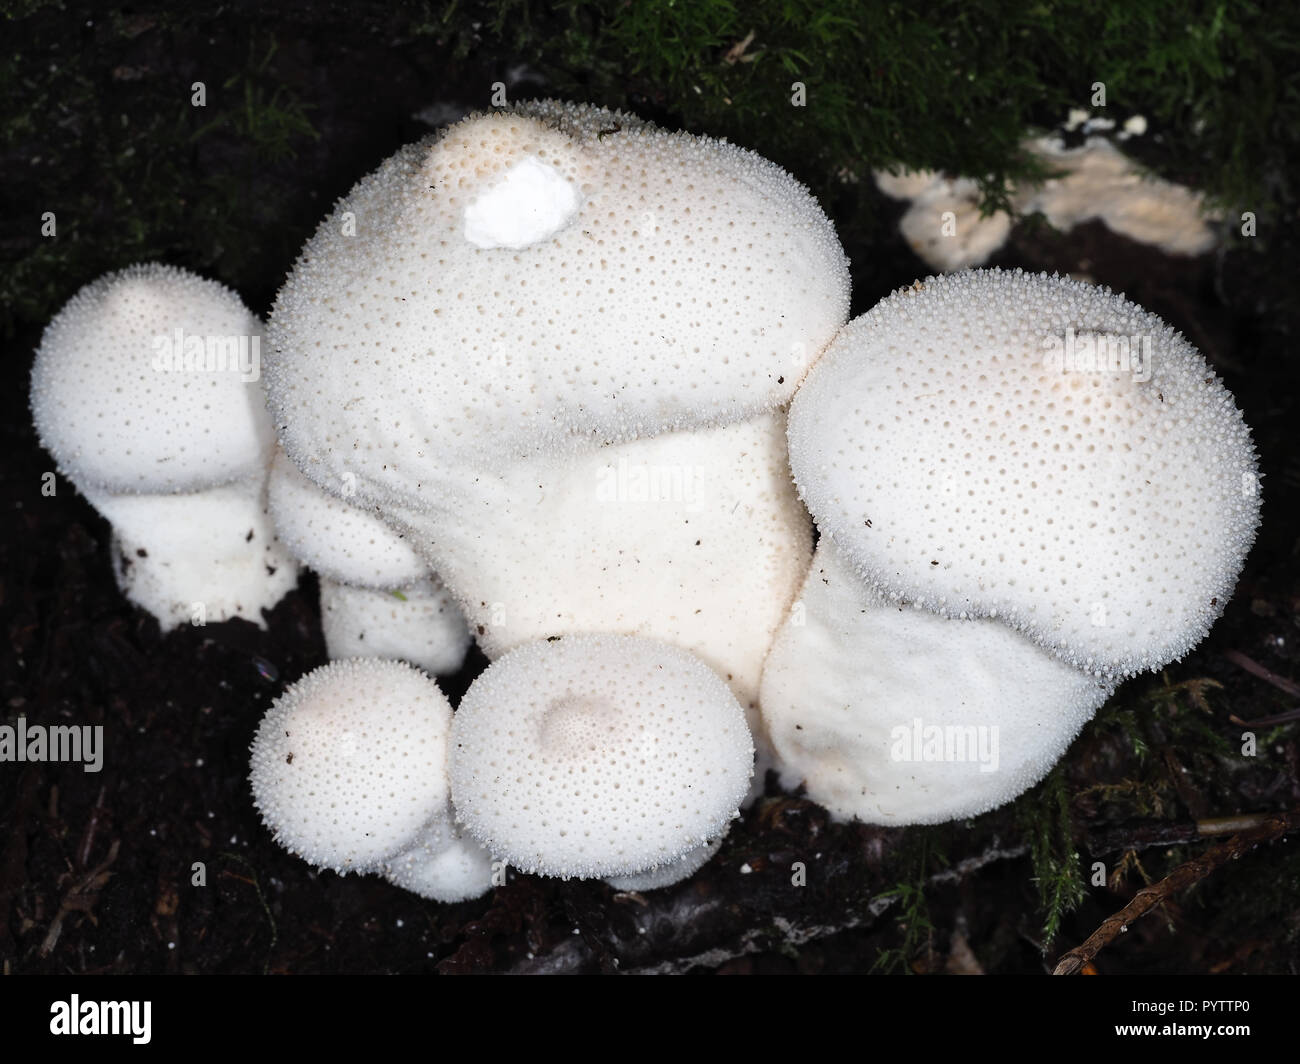 Young common puffball mushrooms (Lycoperdon perlatum) growing in a forest; Washington state, USA Stock Photo